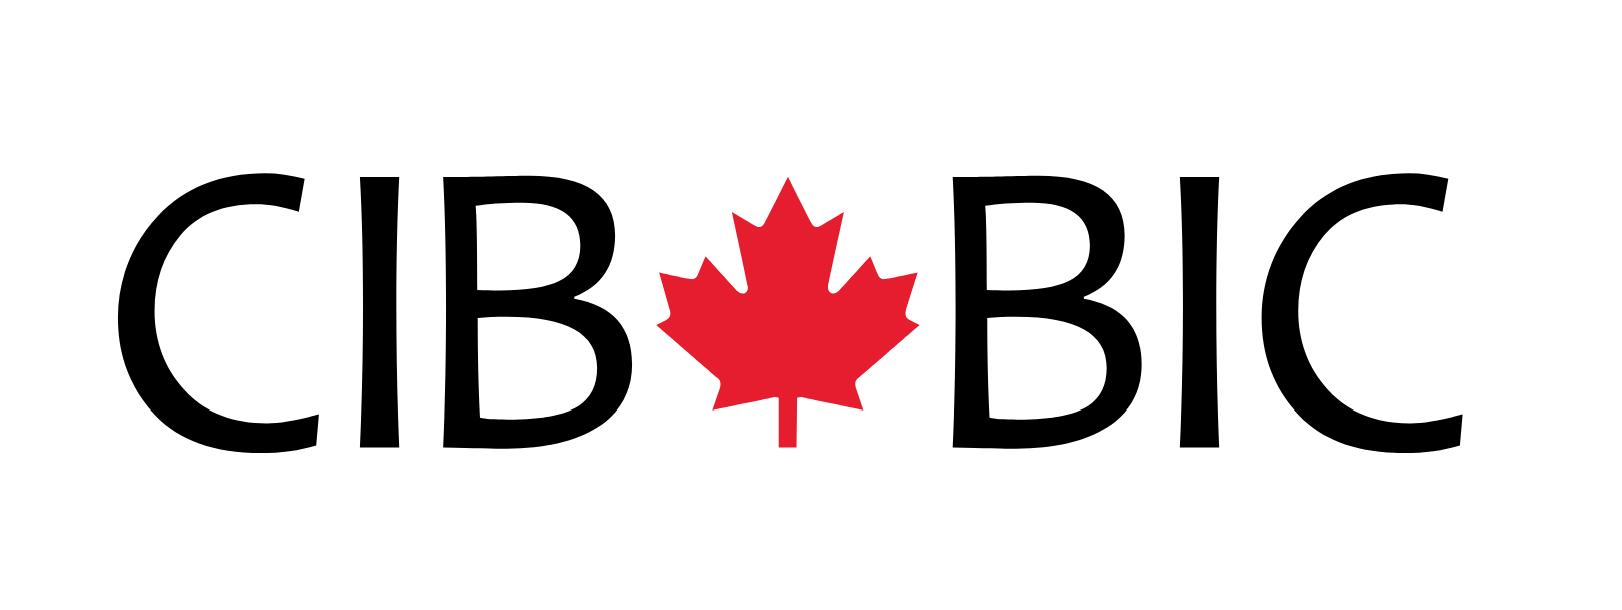 Canada Infrastructure Bank